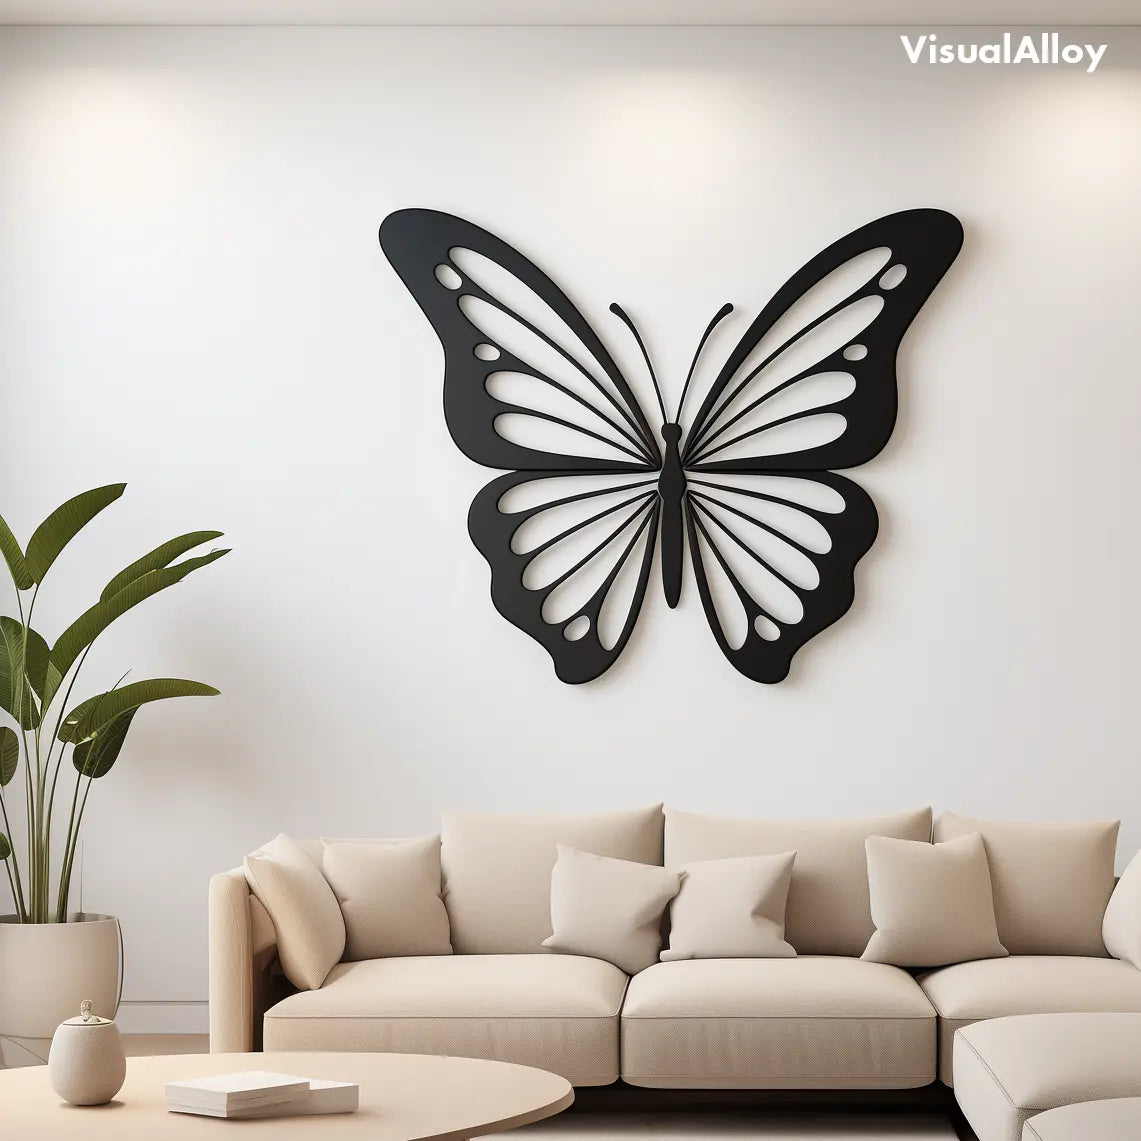 Butterfly wall decor - black color